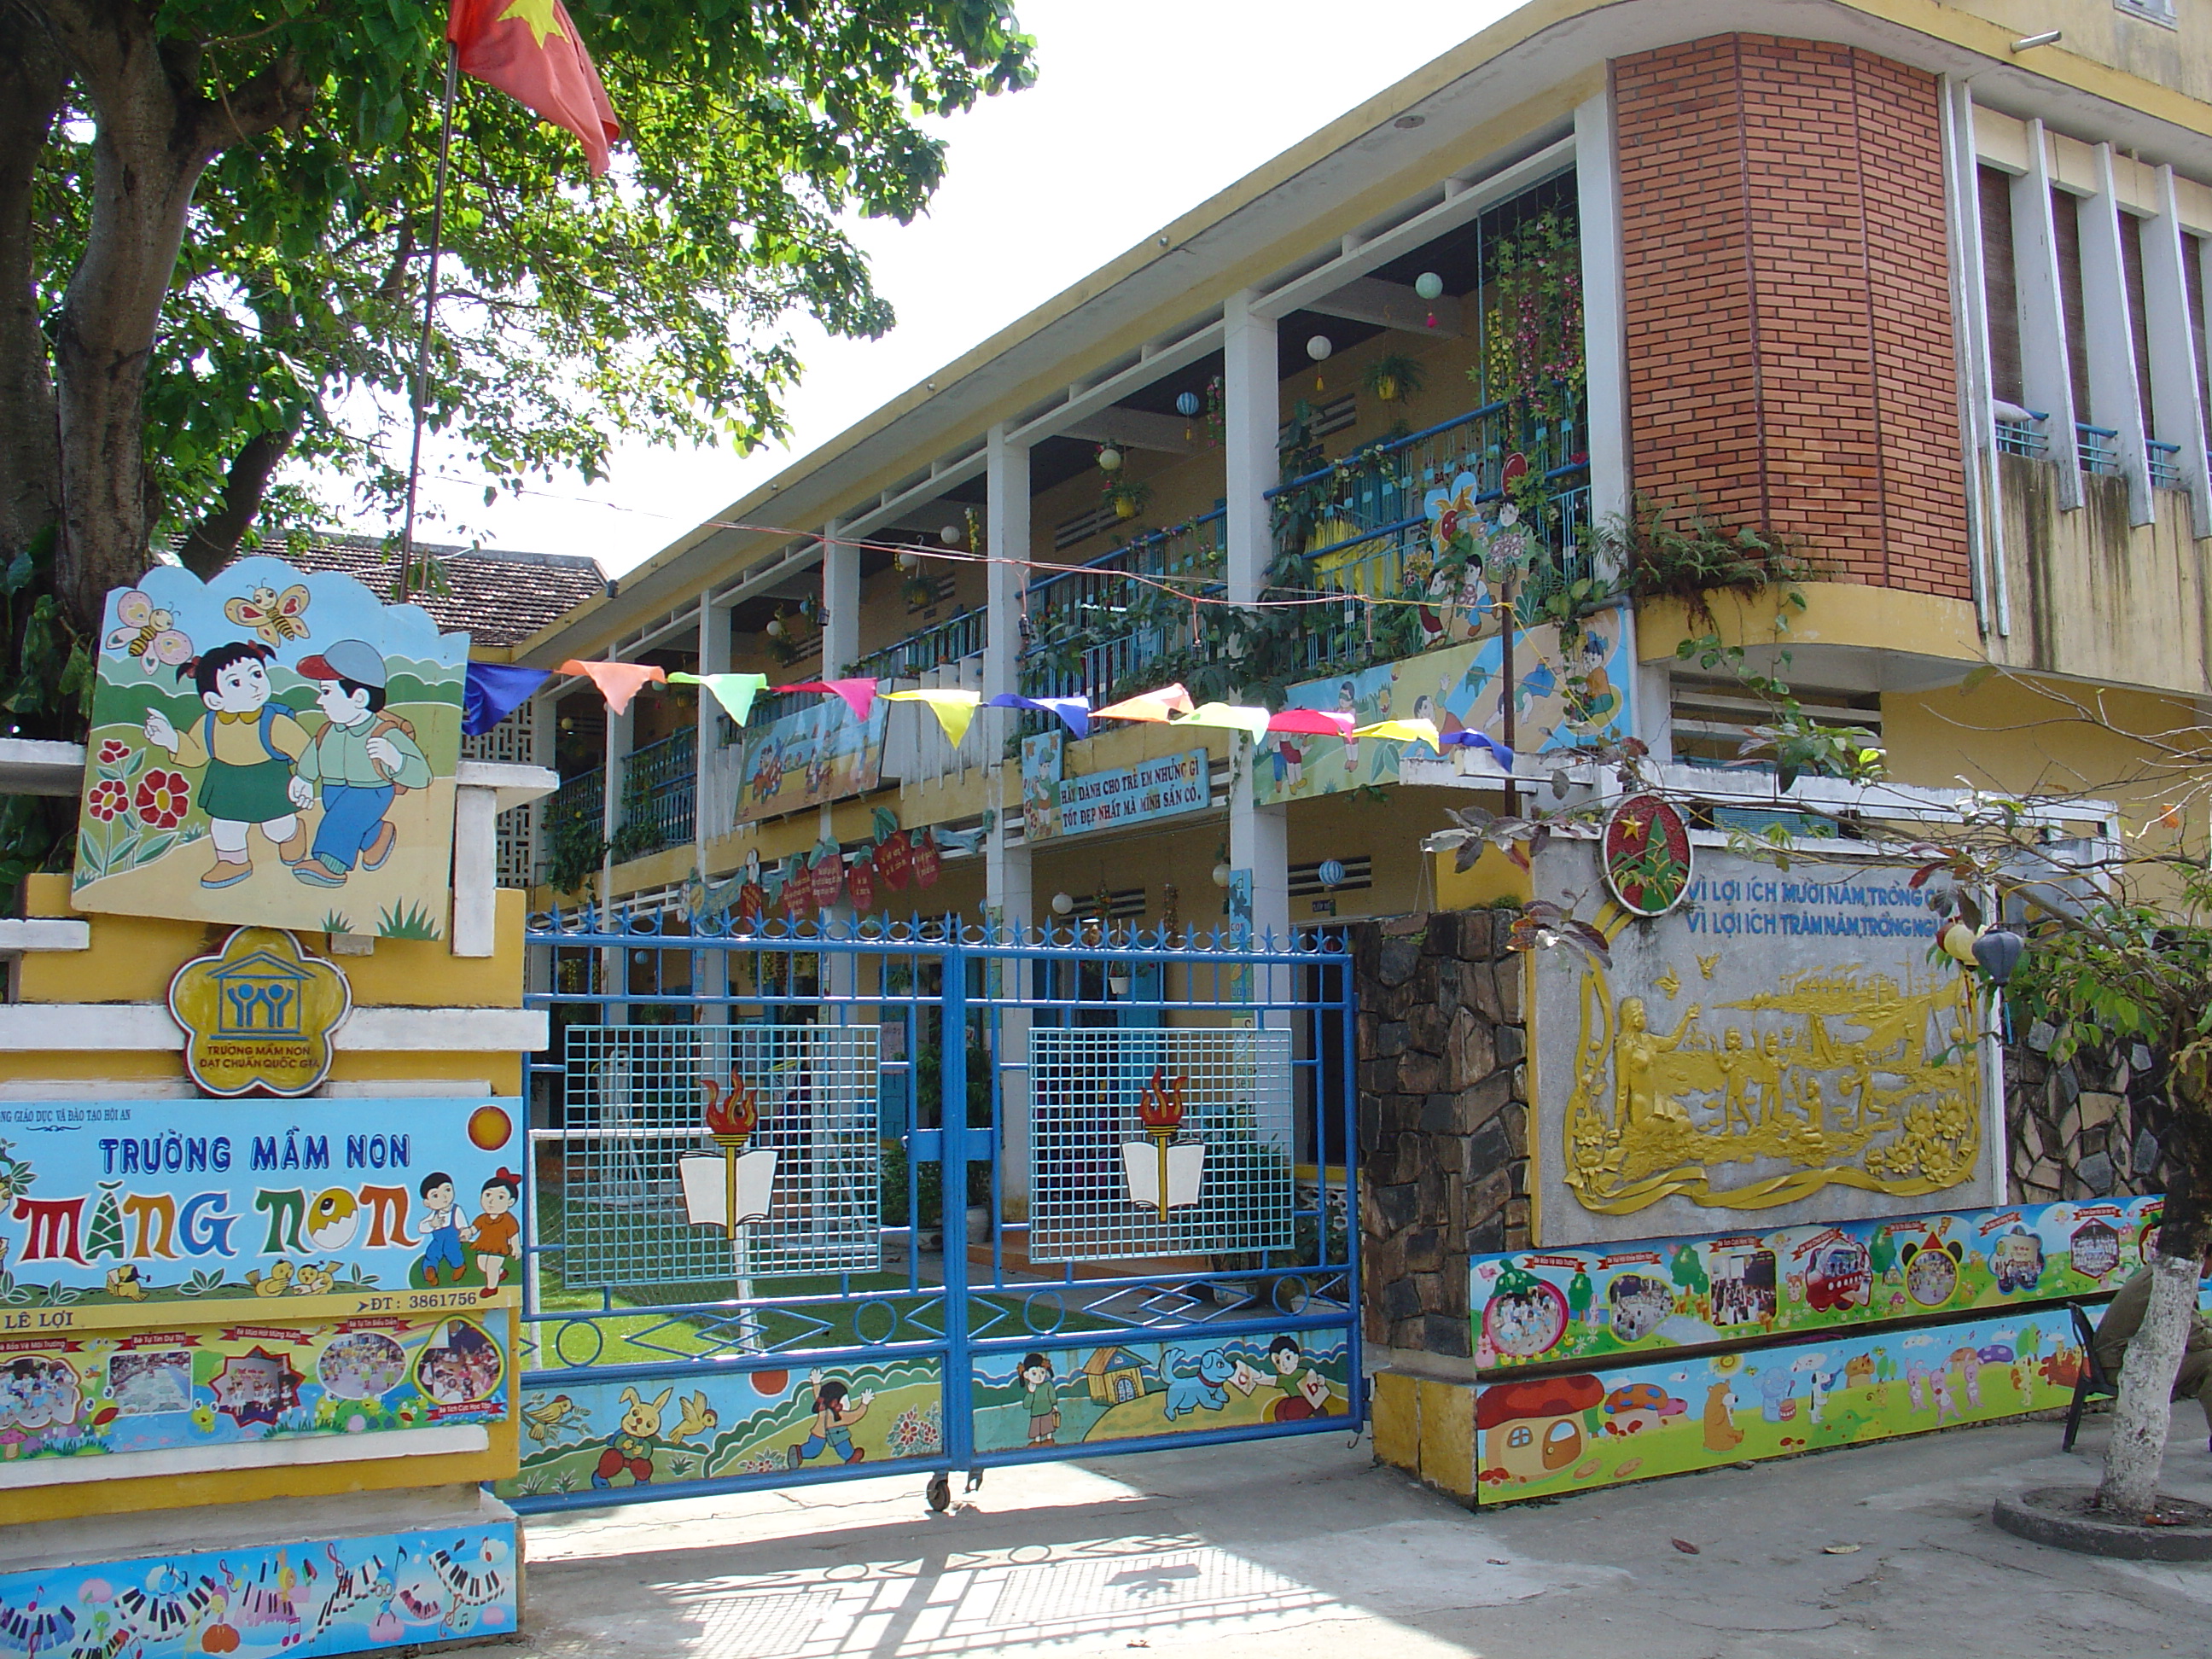 A primary school close to the centre of Hoi An.